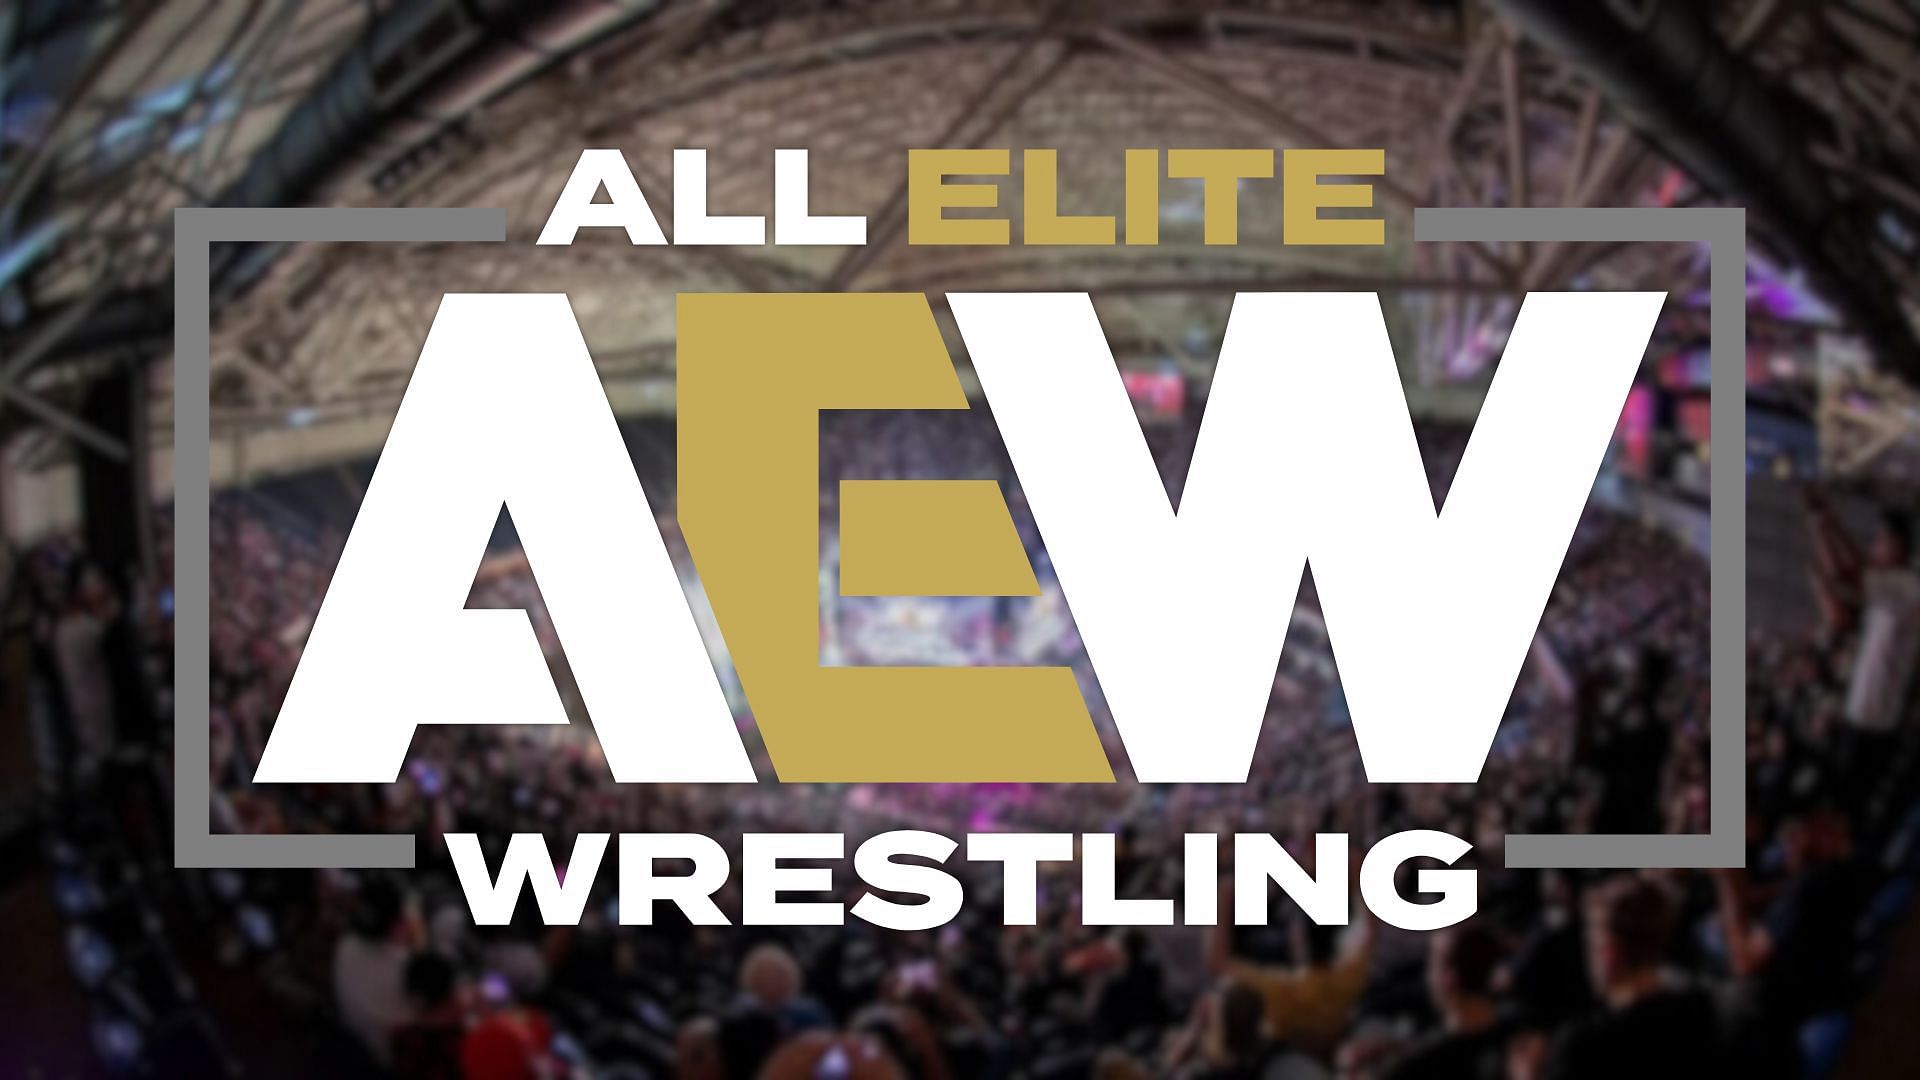 Which current champions have been added to the AEW roster?